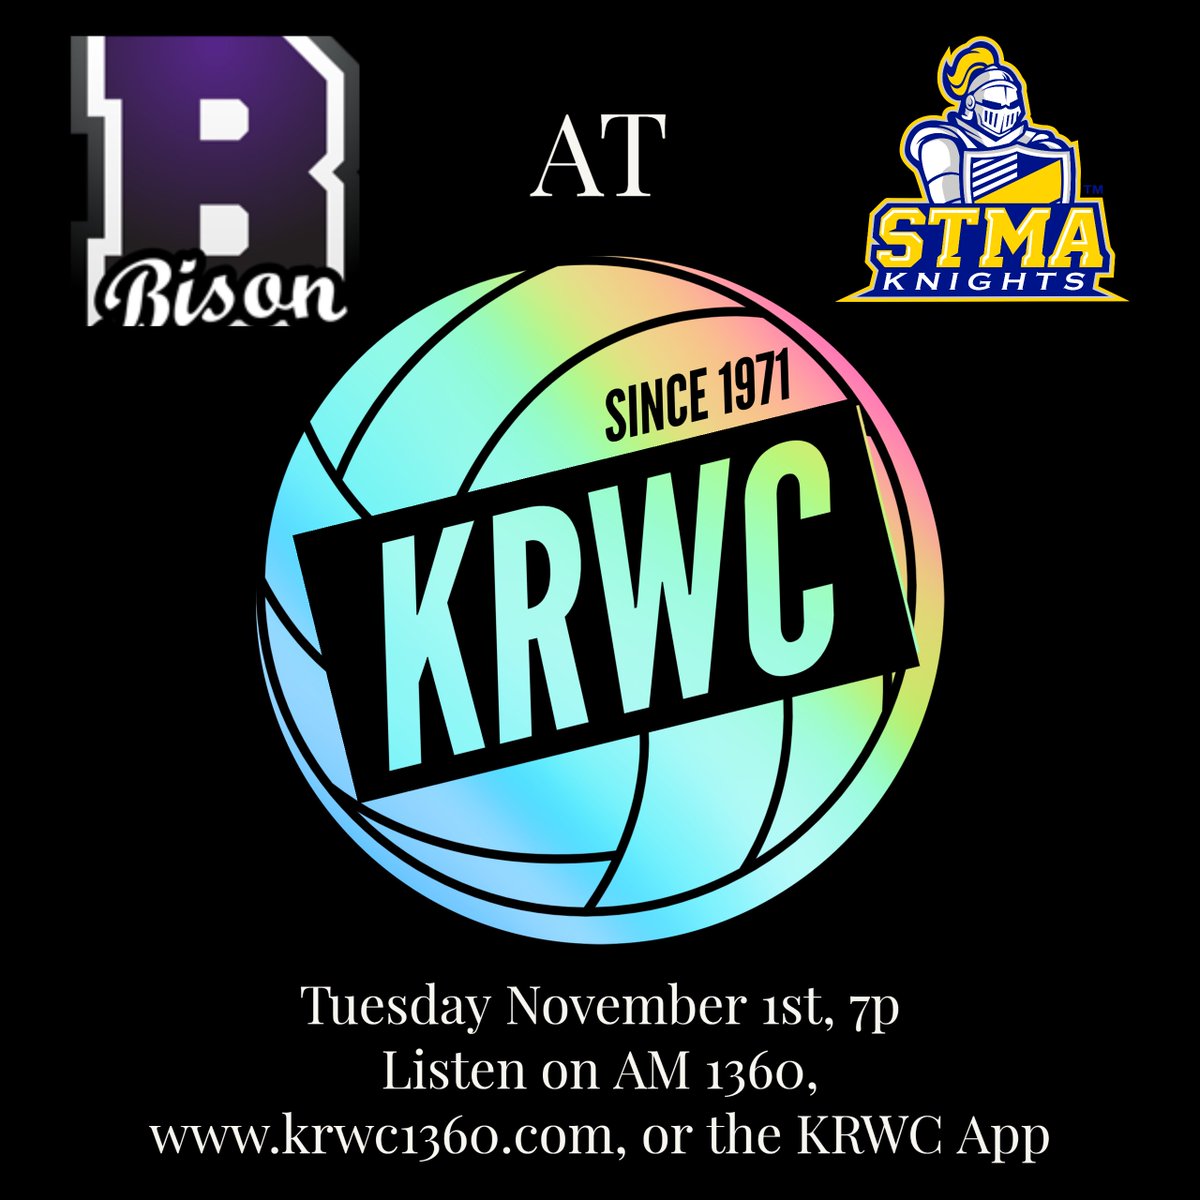 Tonight it's the 8AAAA semifinal as the @VolleyballBison travel to STMA to take on the @stmavb. 

Game time 7p - download the free KRWC app to listen anywhere.

#playoffseason #minnesotavolleyball #radioforwrightcounty #nowstreamingnationwide